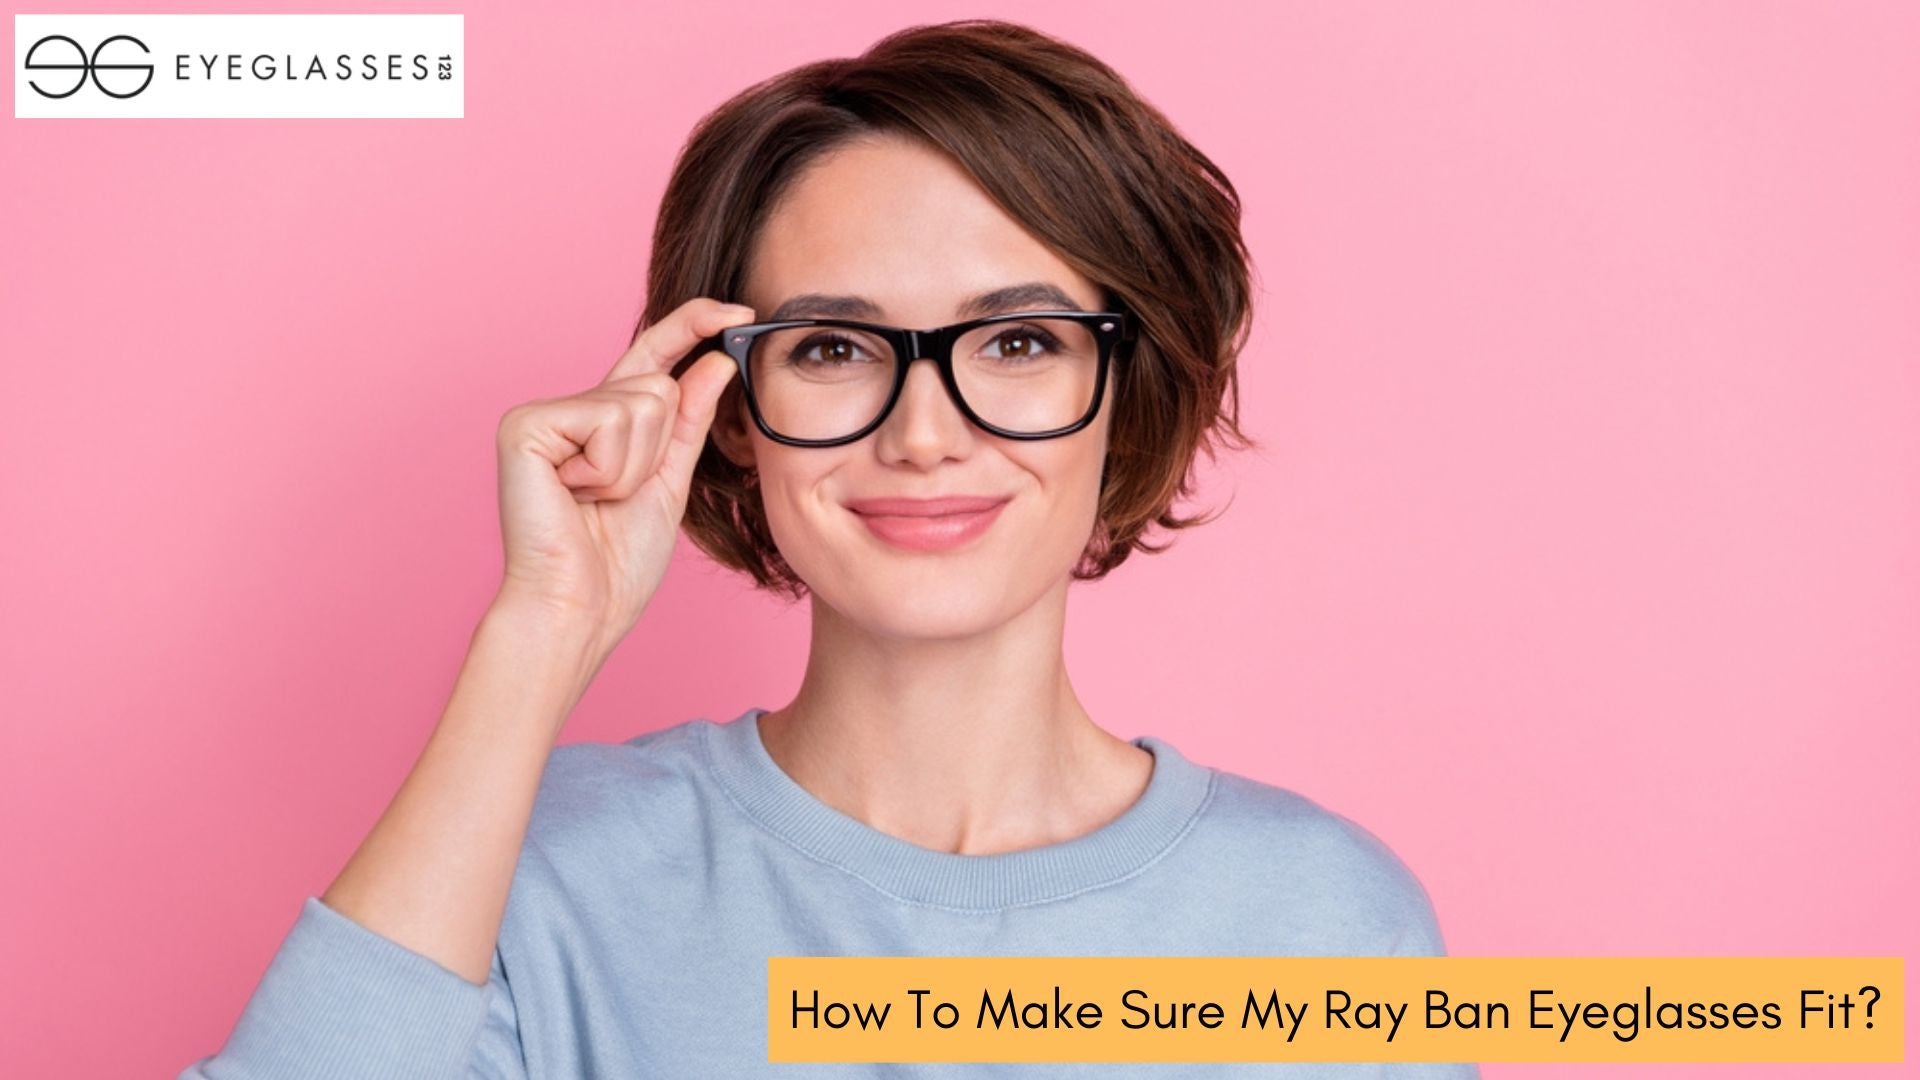 How To Make Sure My Ray Ban Eyeglasses Fit?